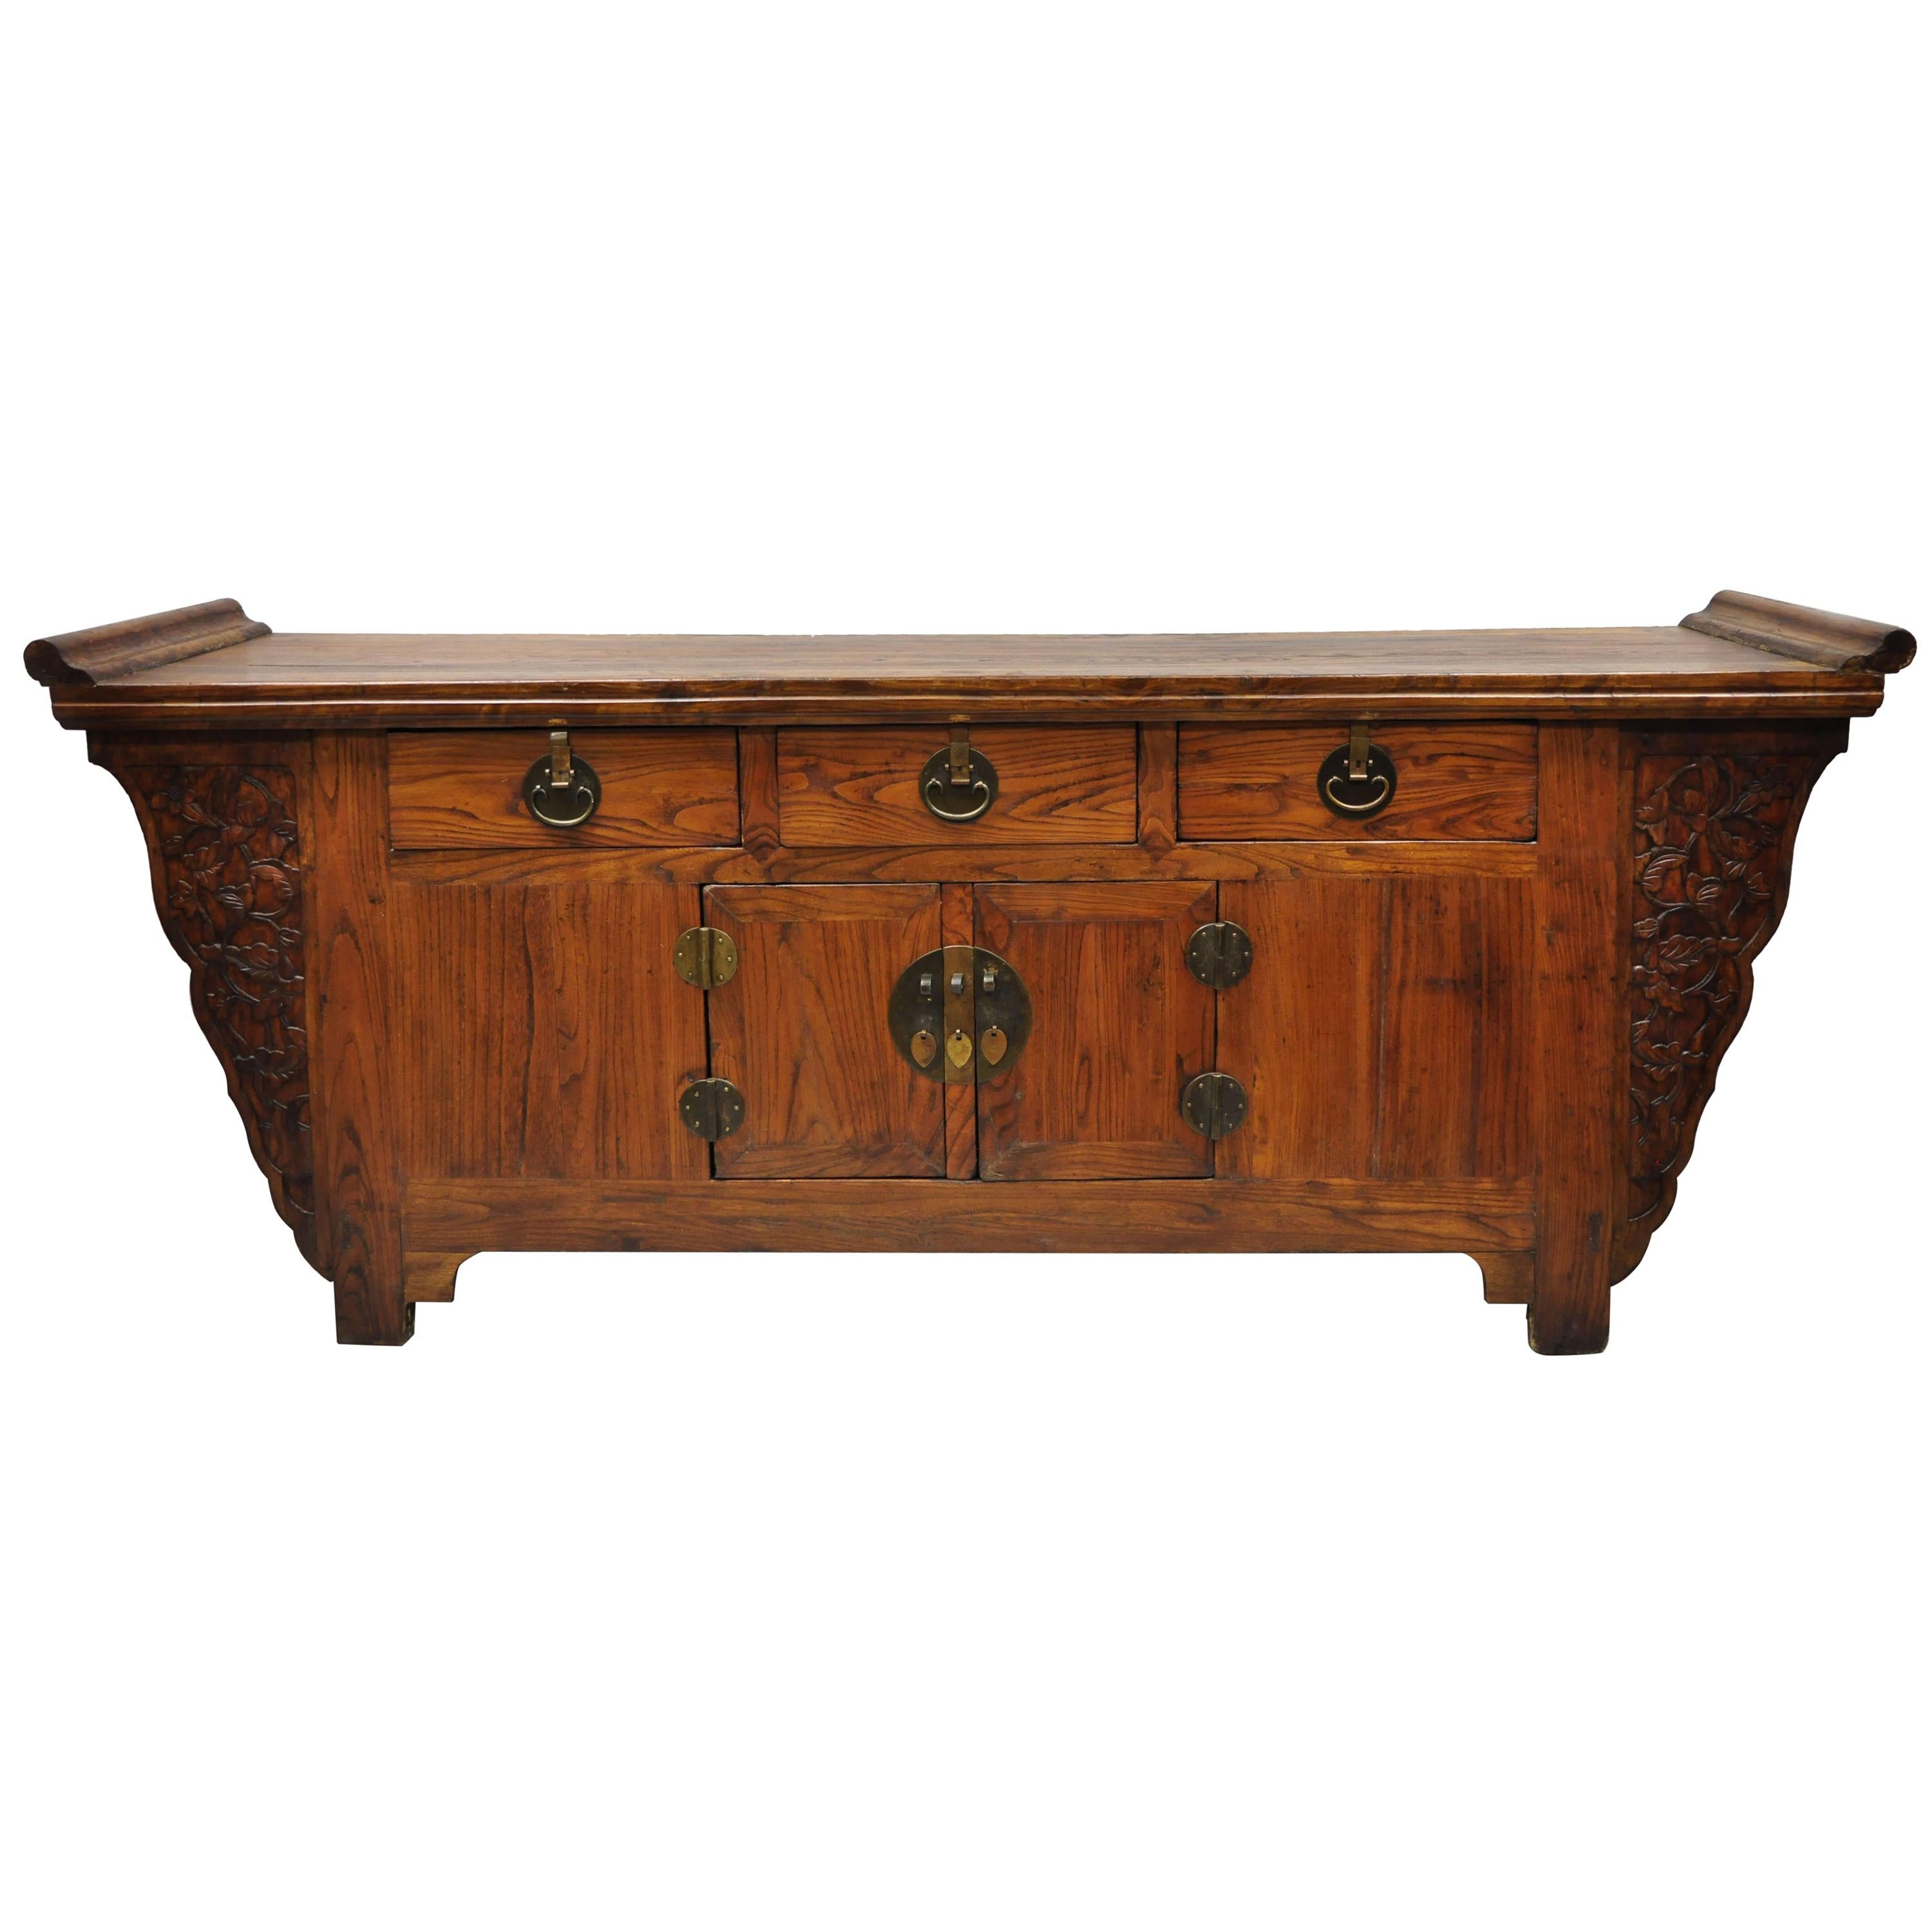 Antique Carved Hardwood Chinese Altar Console Table Sideboard Buffet Cabinet For Sale